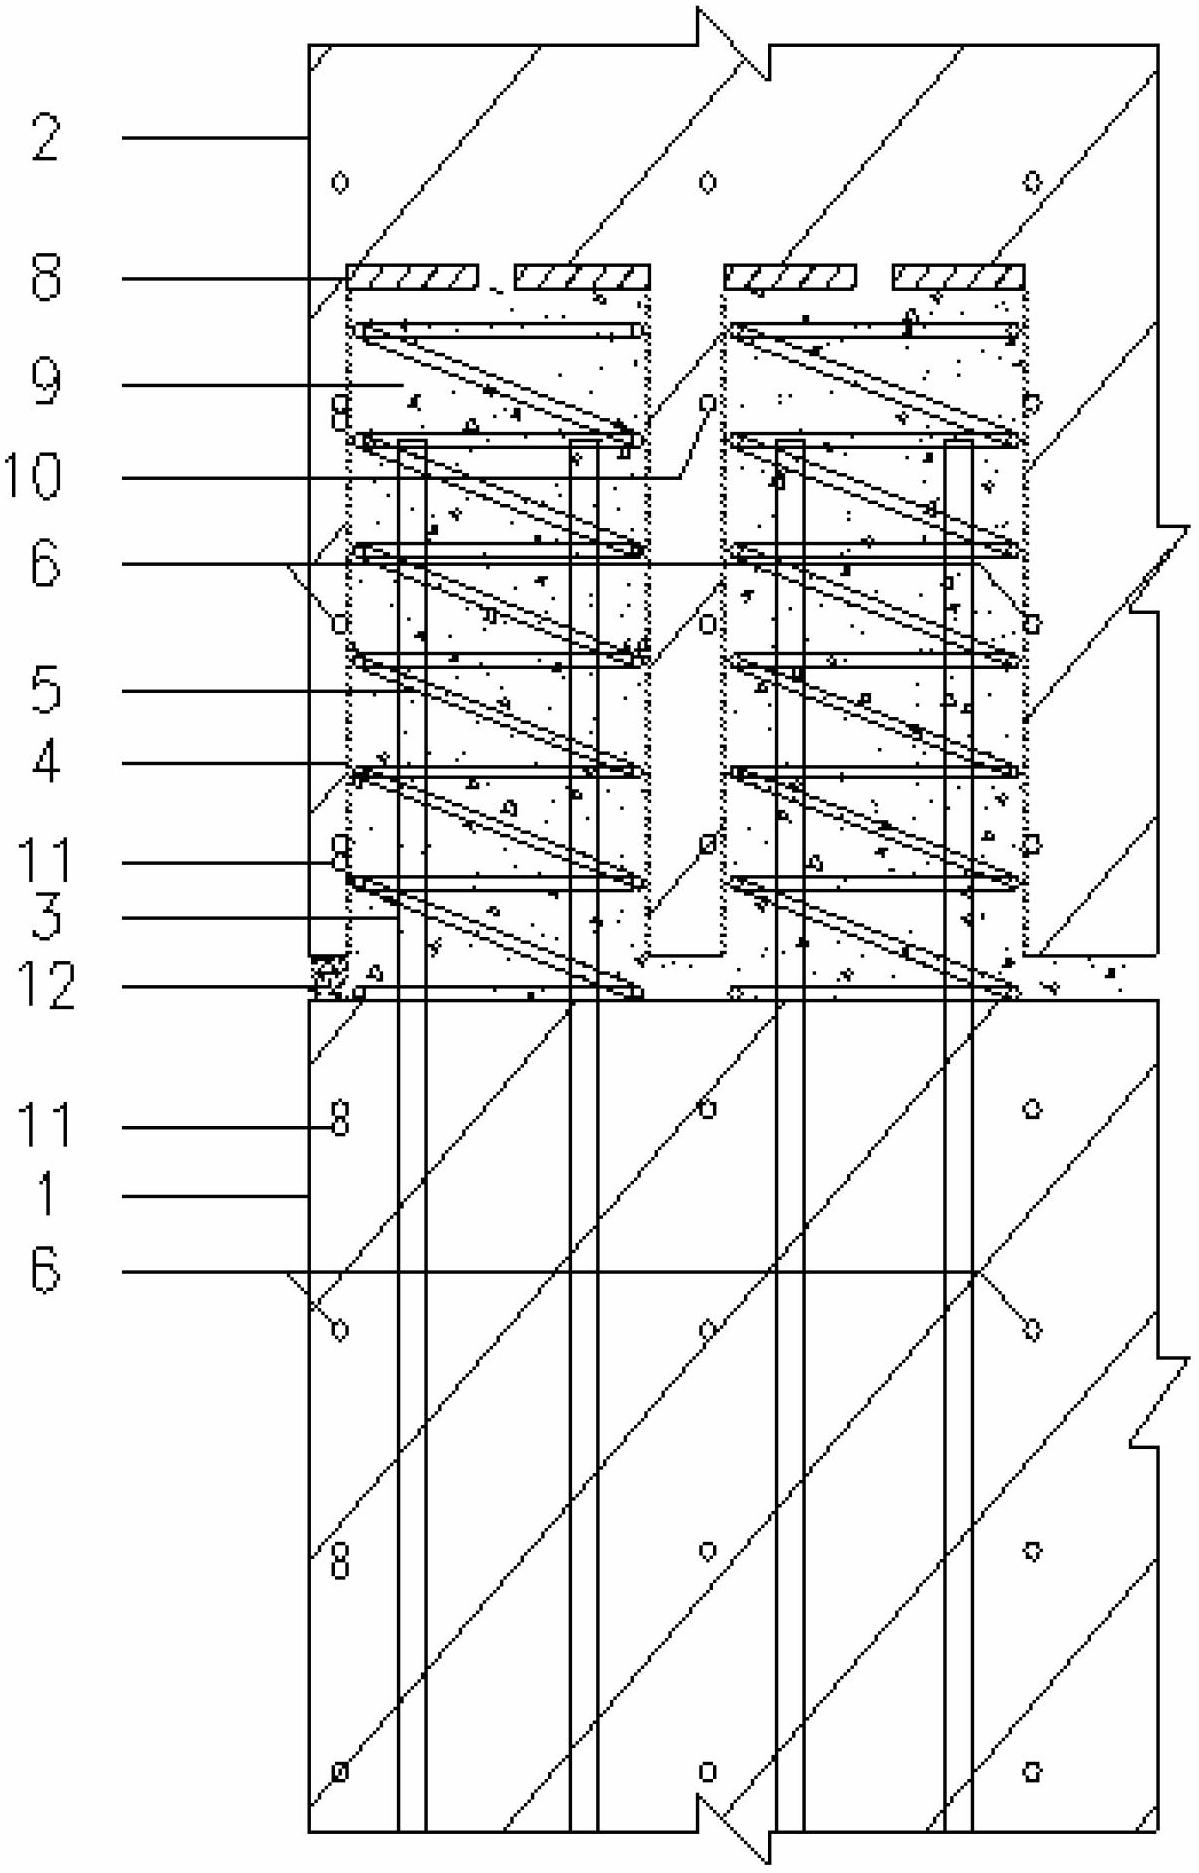 Connecting structure for assembly type concrete shear wall edge member